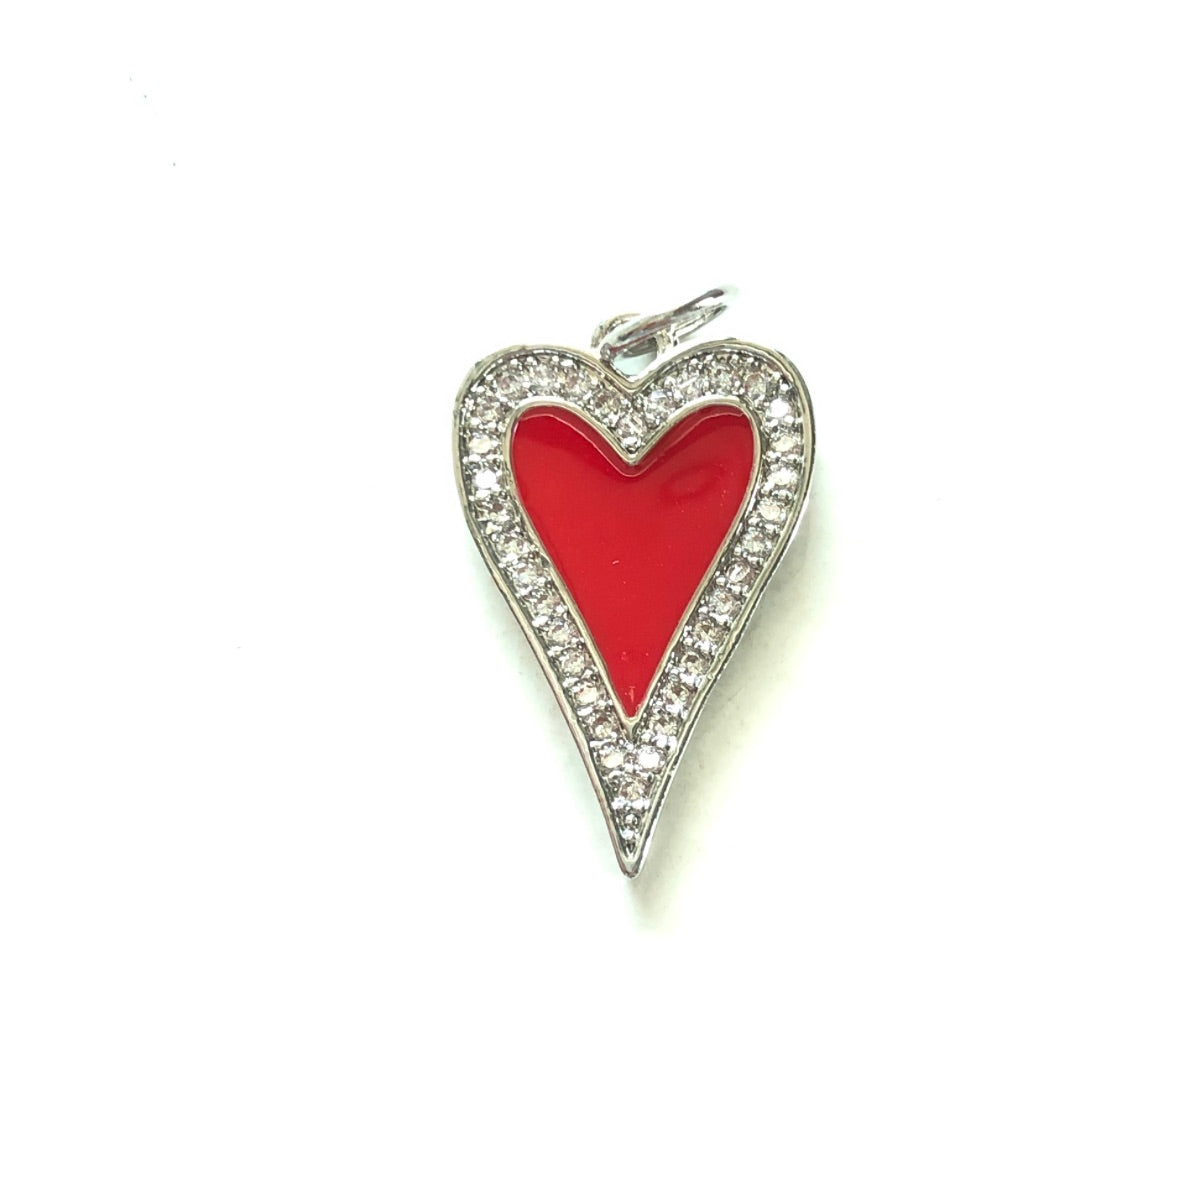 10pcs/lot 23.4*14.6mm Red, Pink, White, Black, Fuchsia Enamel CZ Pave Heart Charms-Silver Red CZ Paved Charms Hearts New Charms Arrivals Charms Beads Beyond